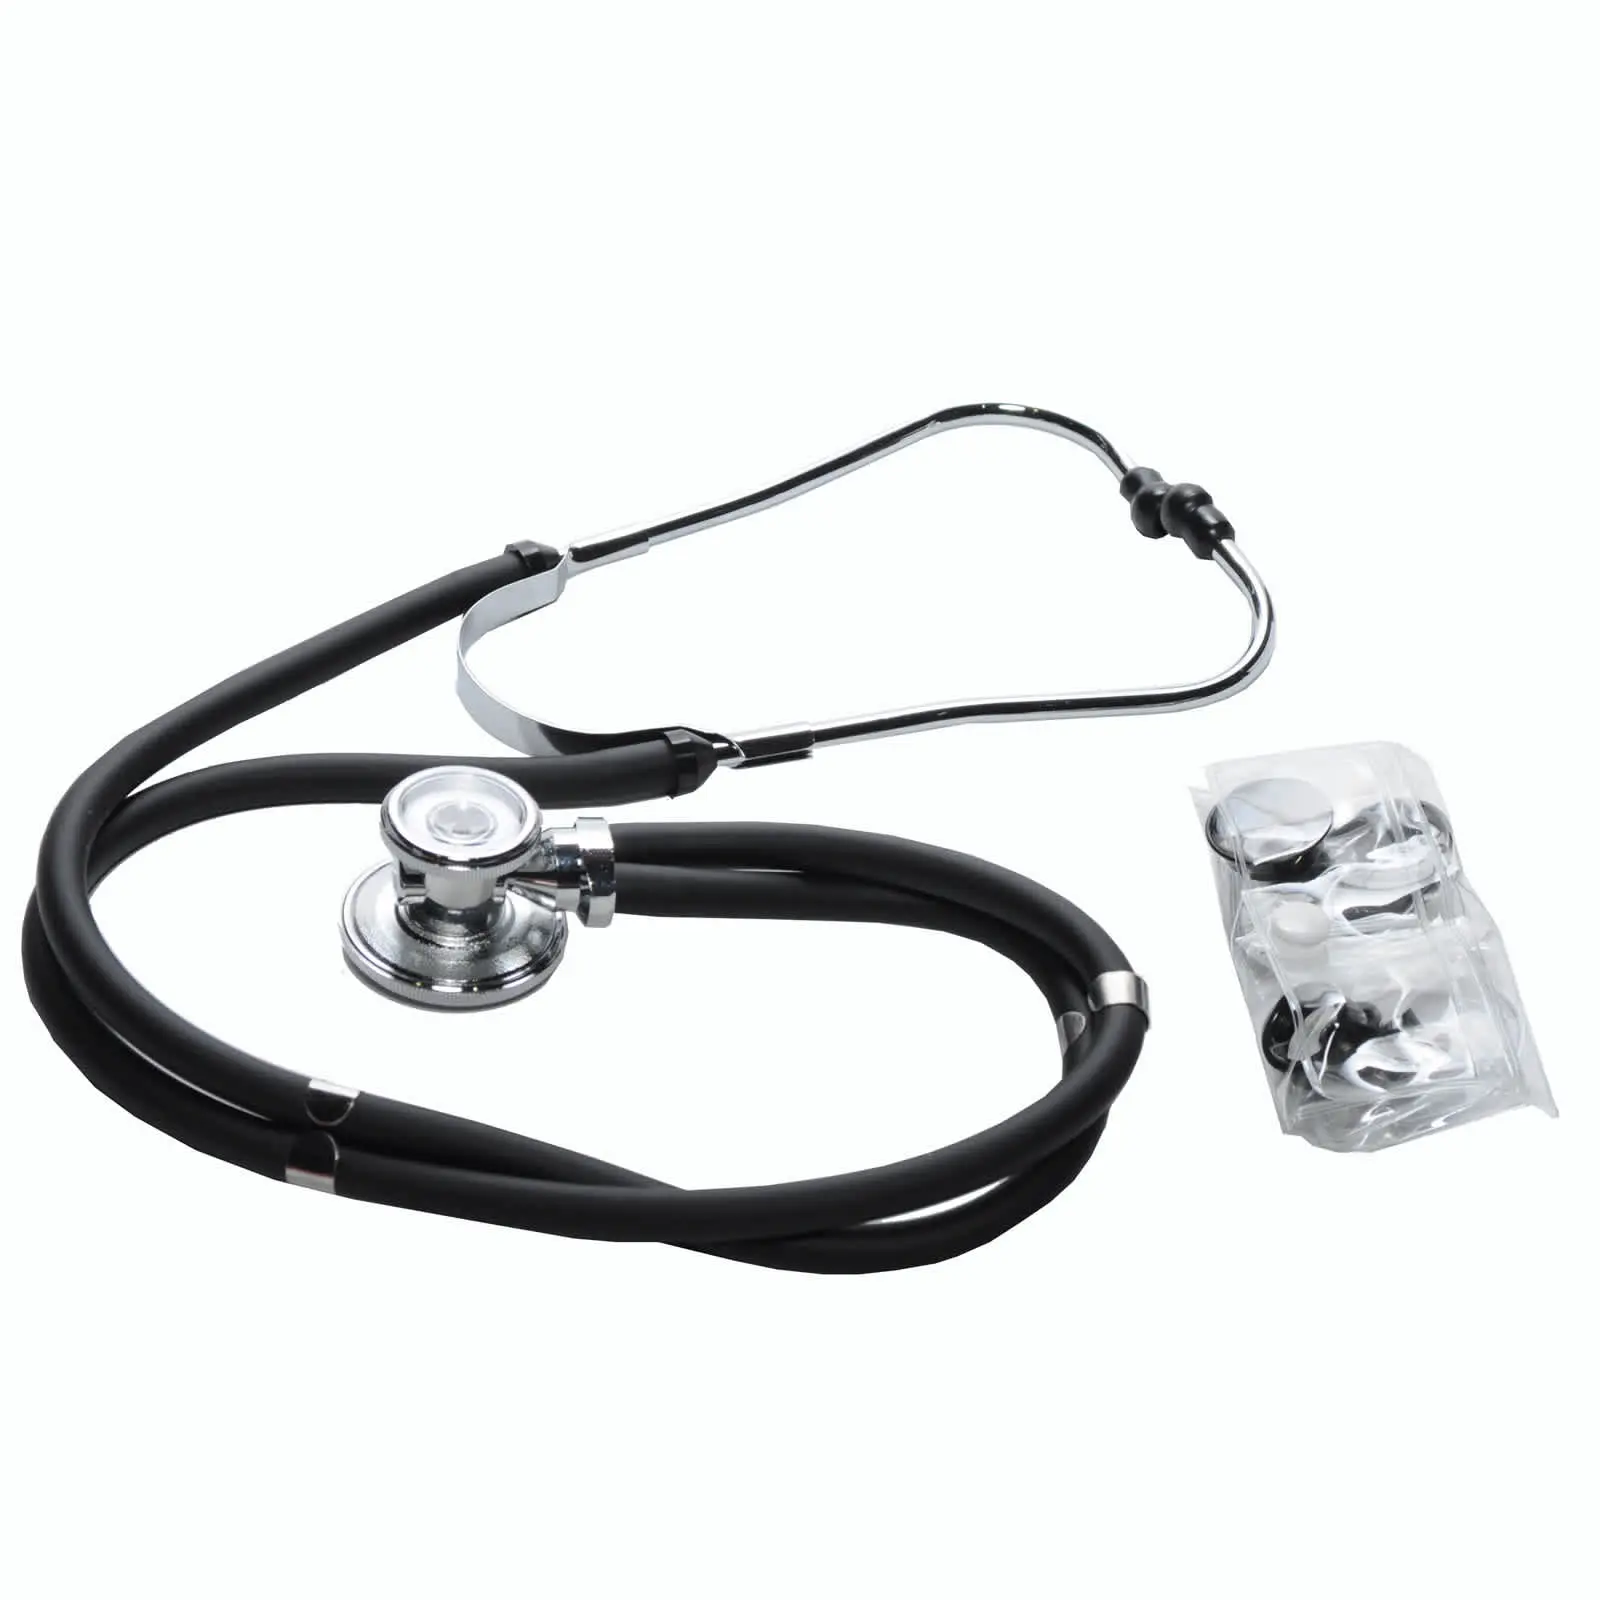 hewlett packard stethoscope tubing - Can you replace just the tubing on a stethoscope